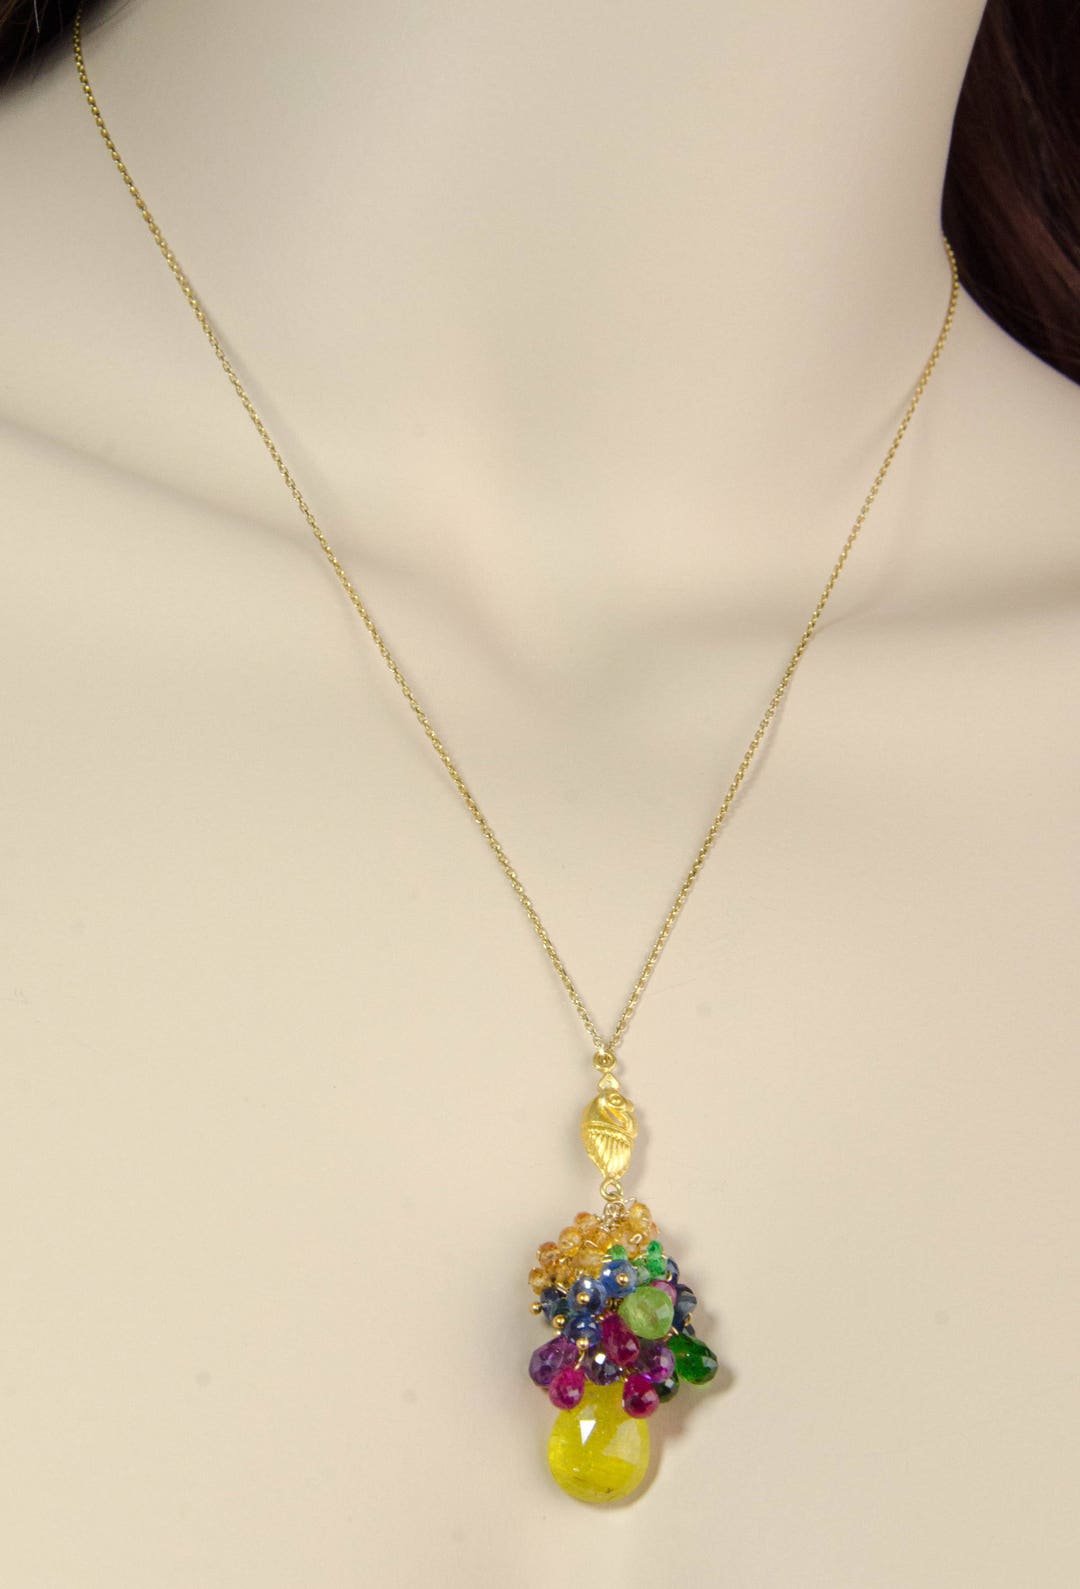 22k Solid Gold Gemstone Cluster Necklace With Tourmaline Focal Stone - Etsy